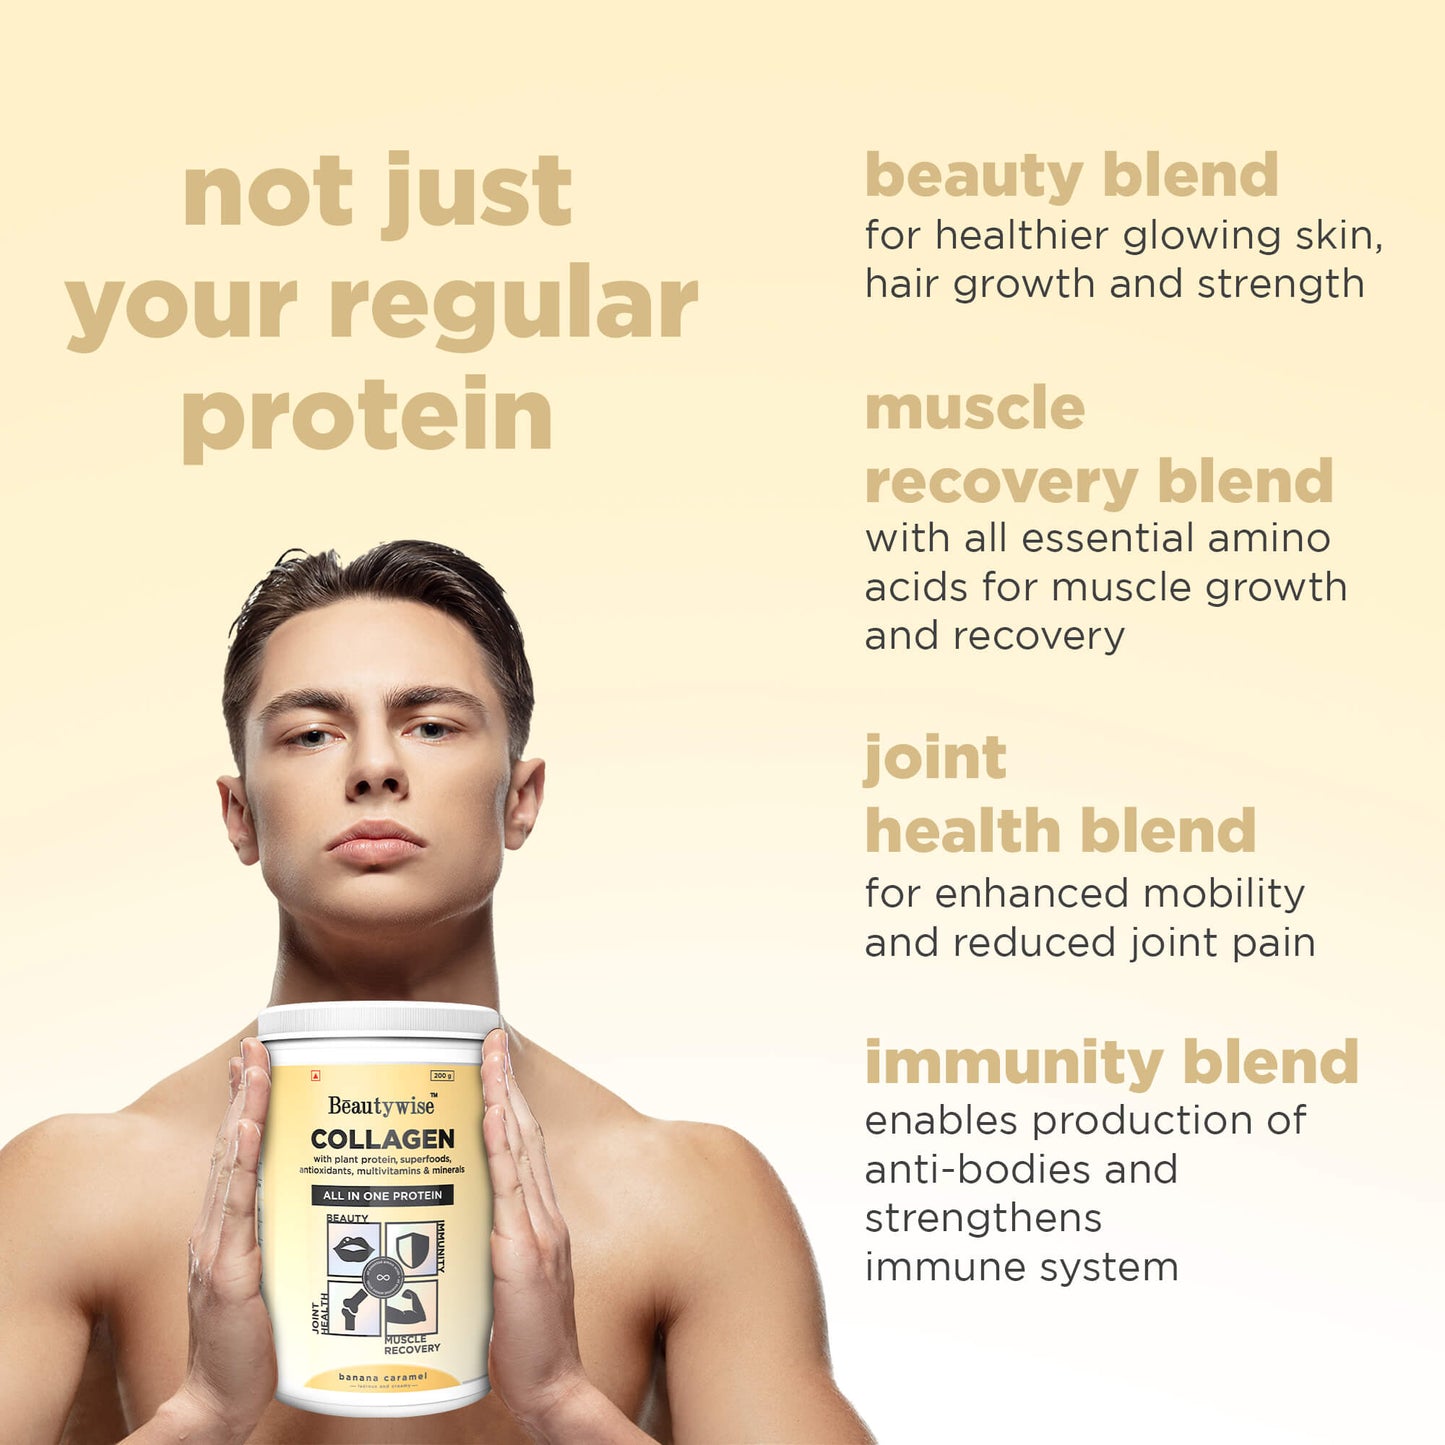 Banana Caramel All-in-one Collagen Proteins